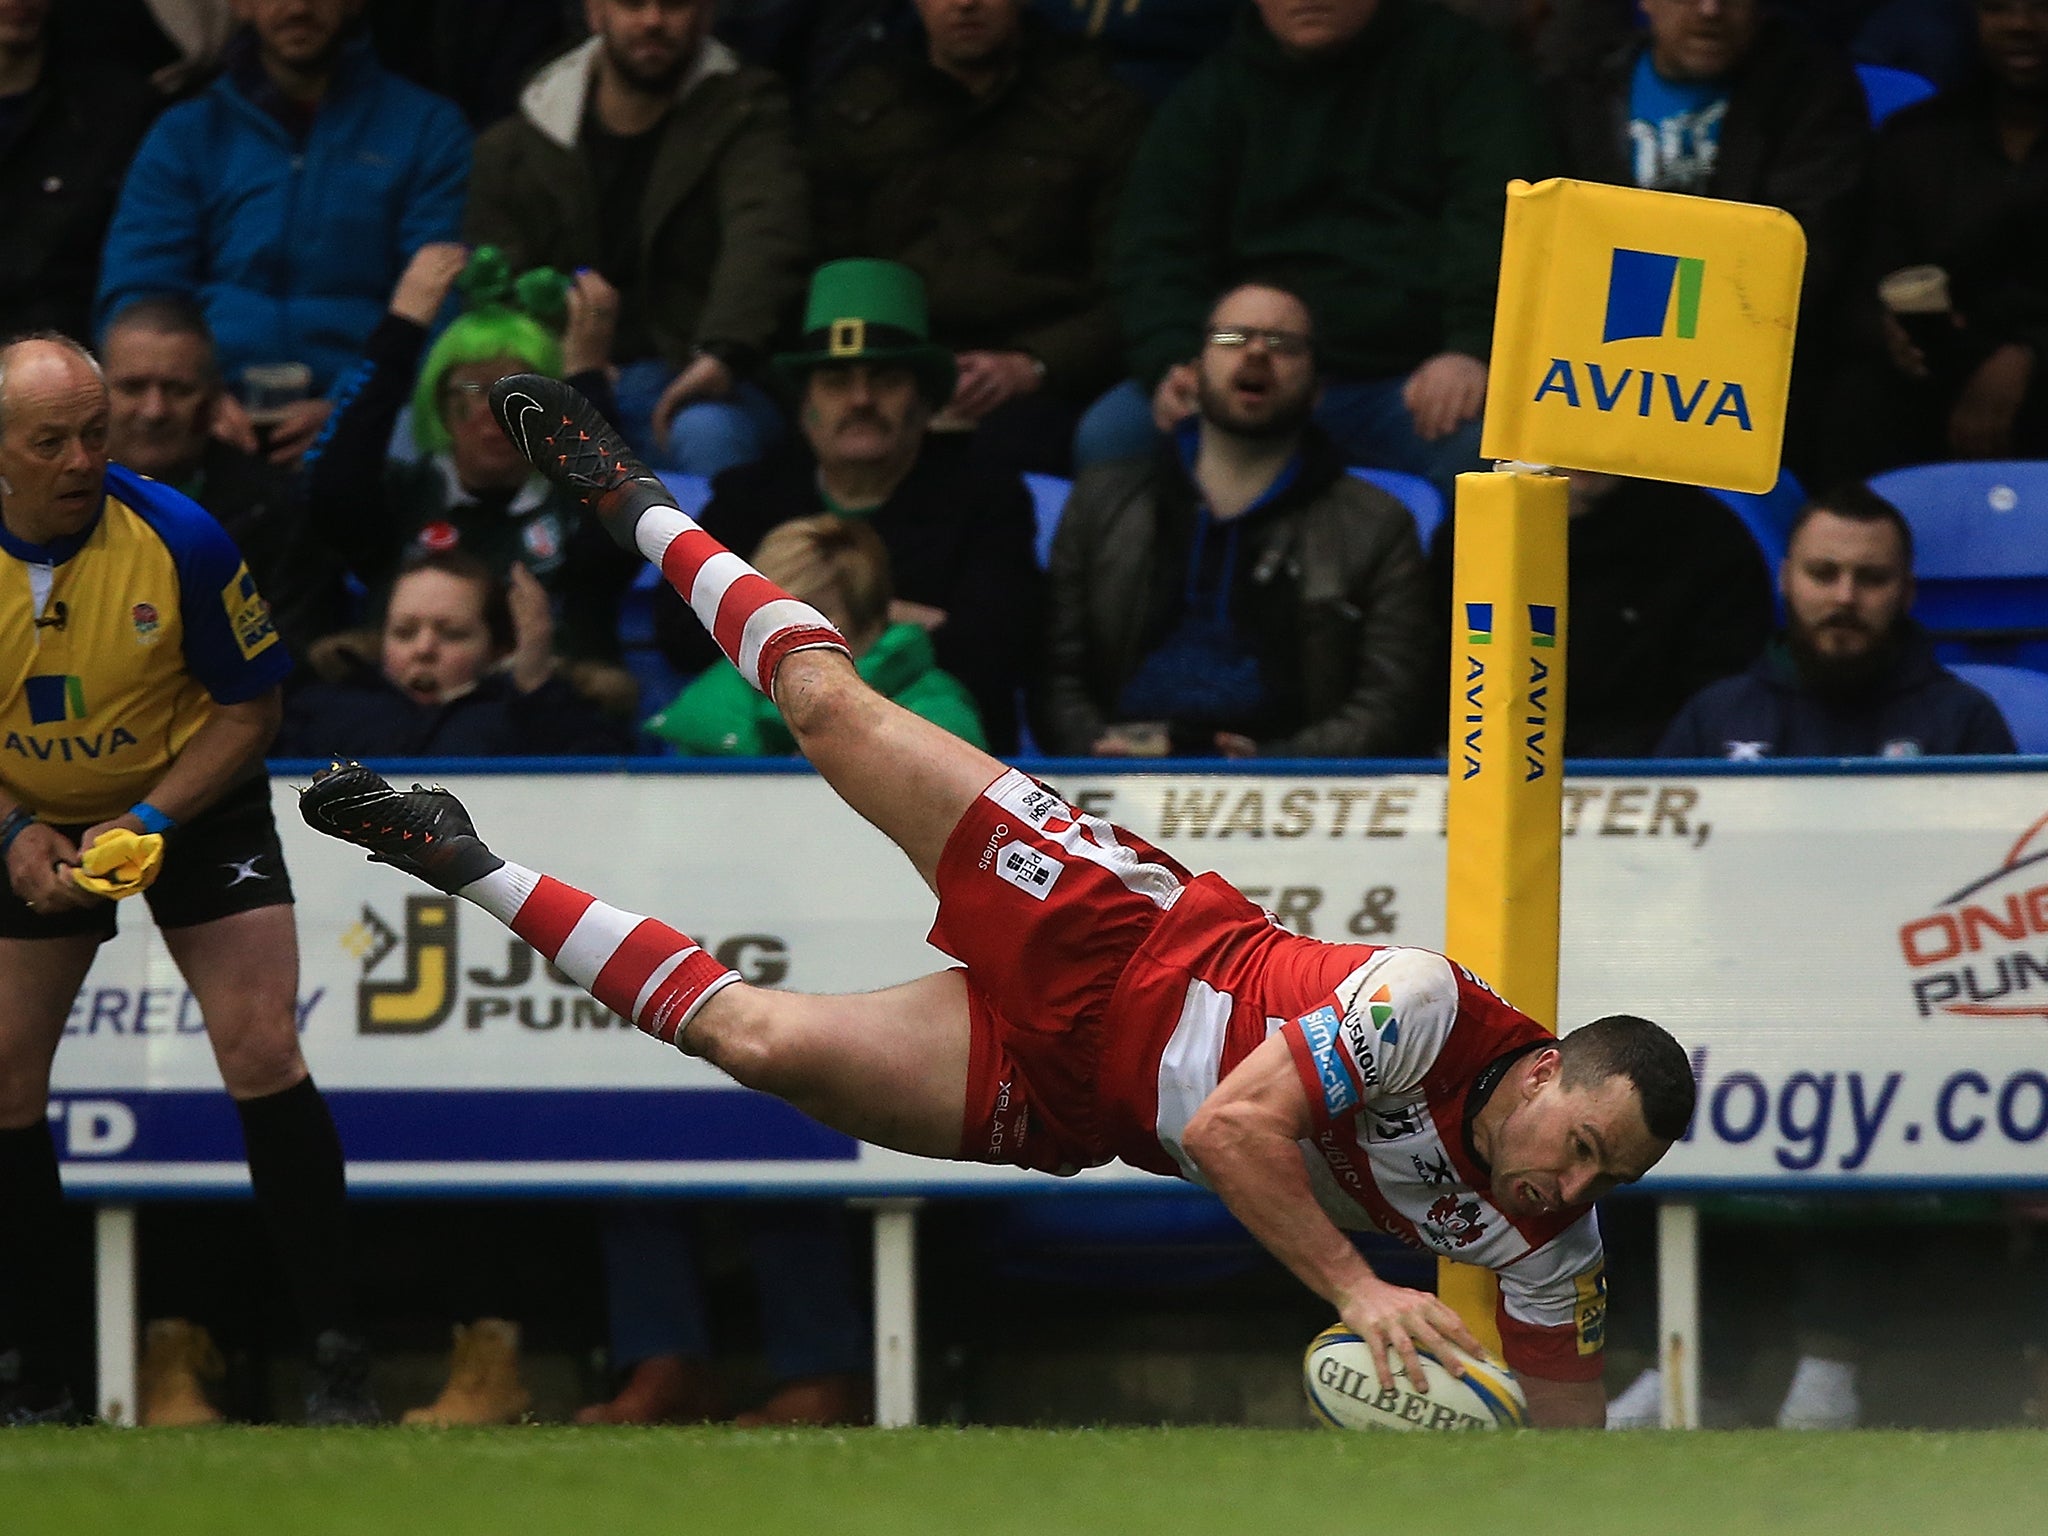 Tom Marshall dives for the line to score one of Gloucester's five tries against London Irish